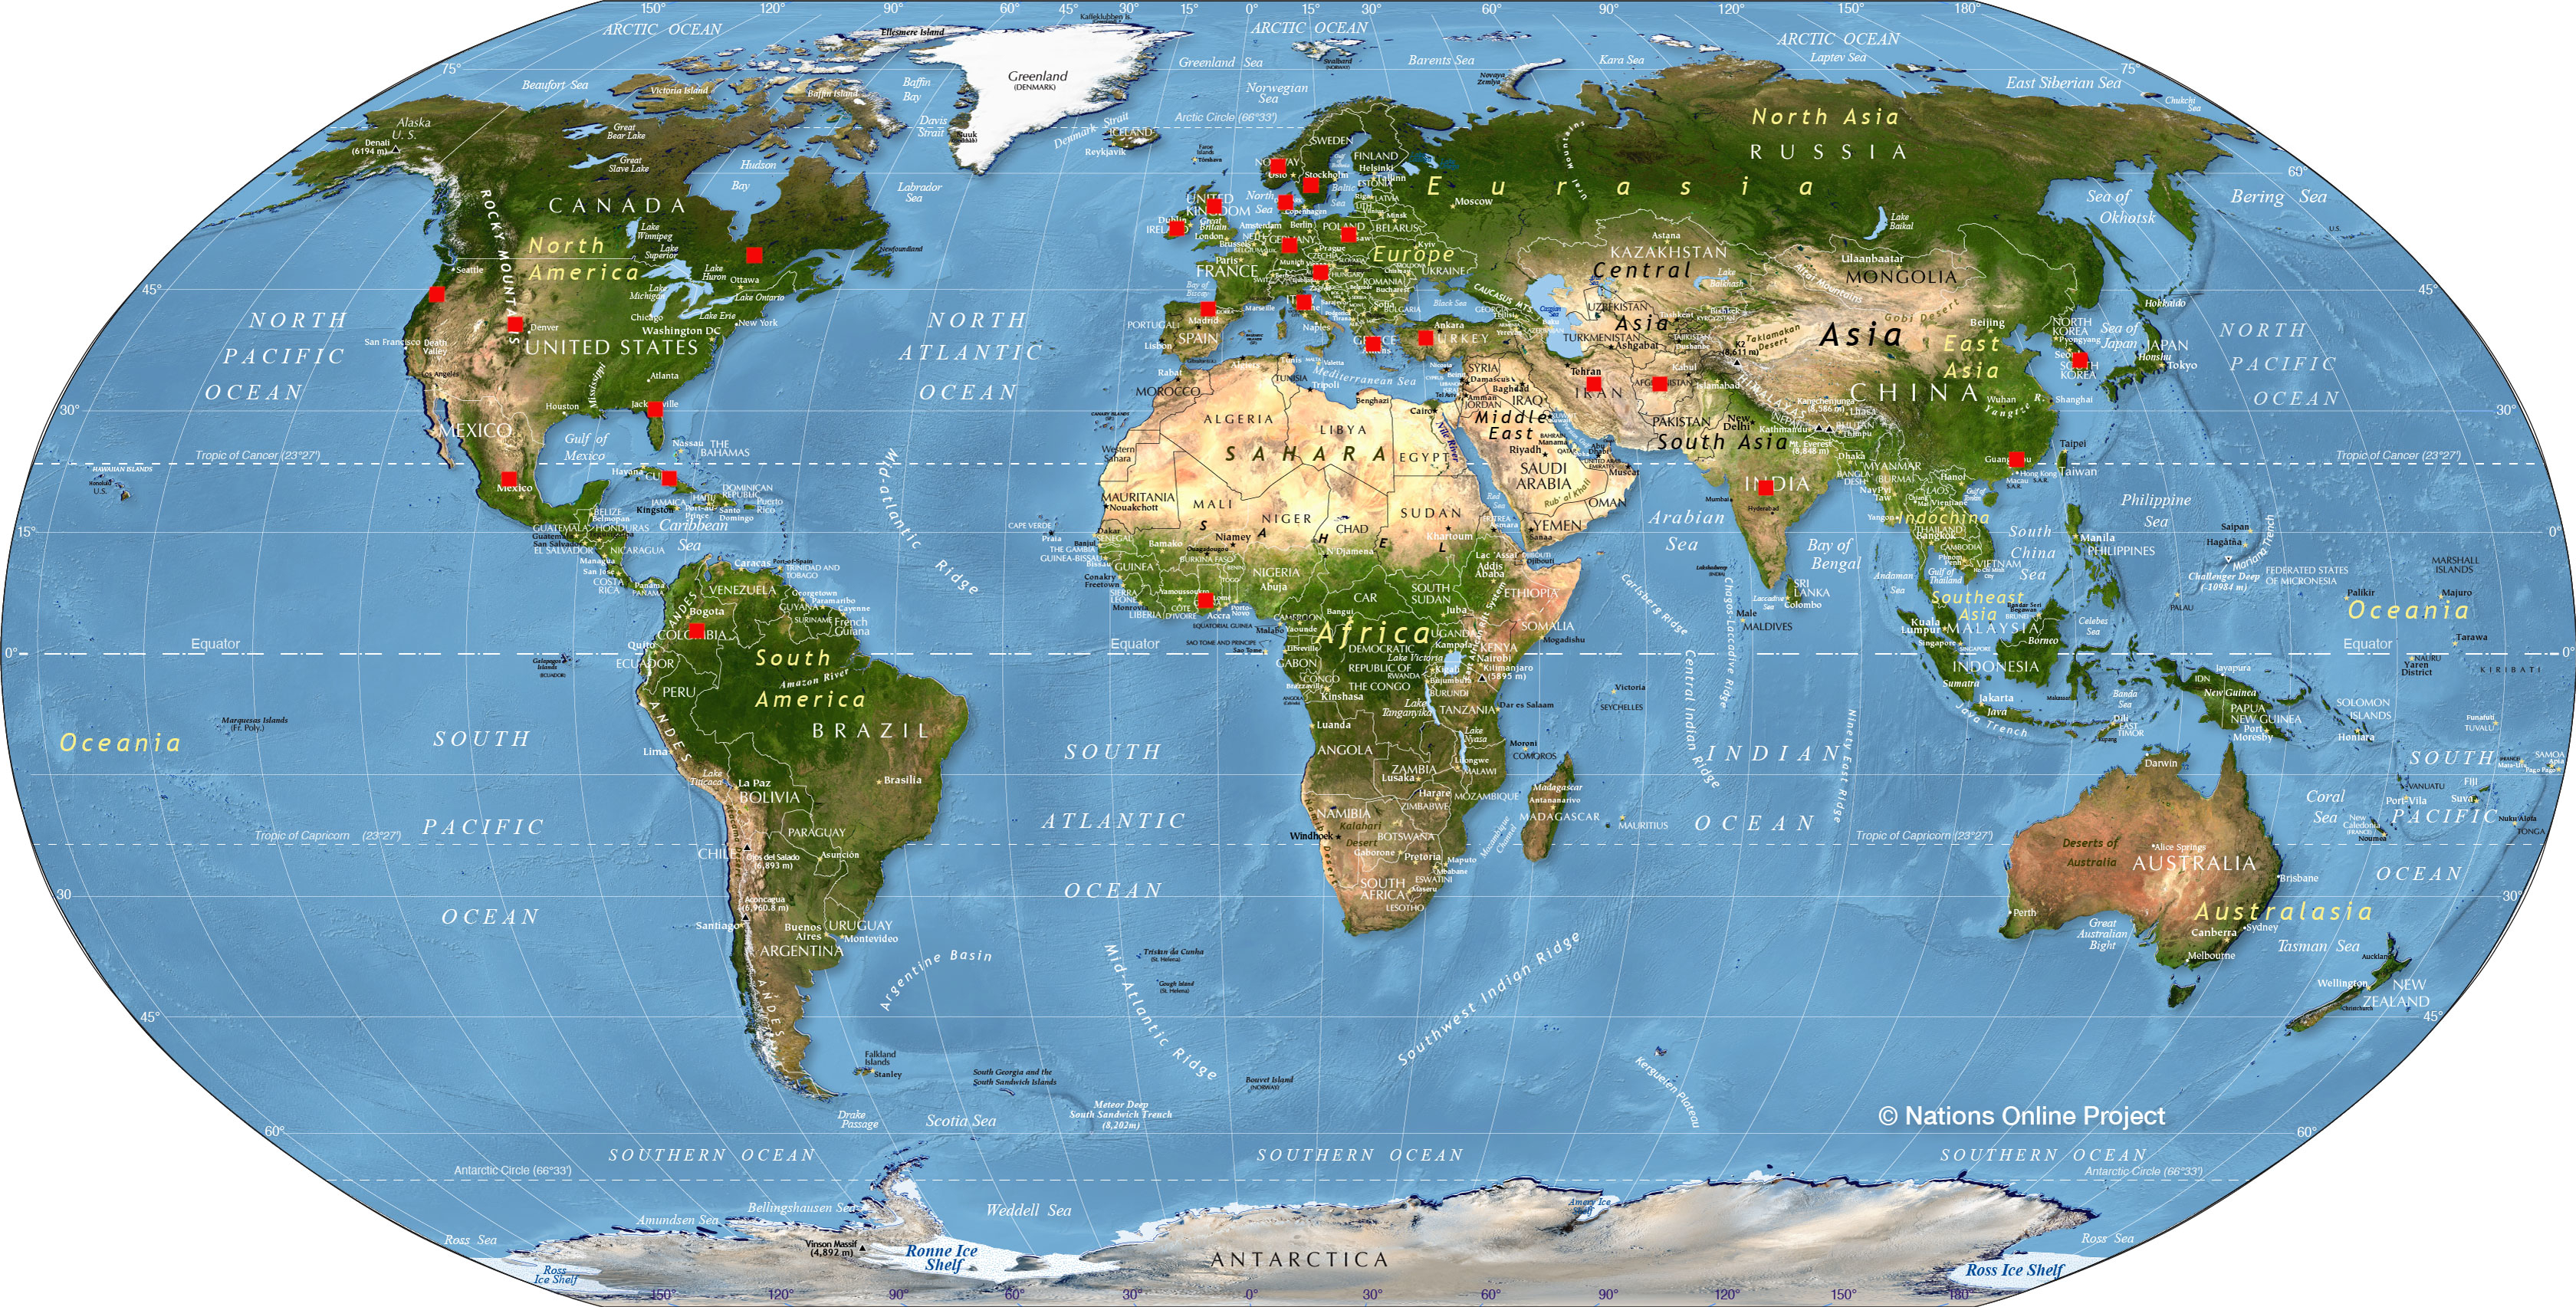 ../../_images/Physical-World-Map-3360.jpg